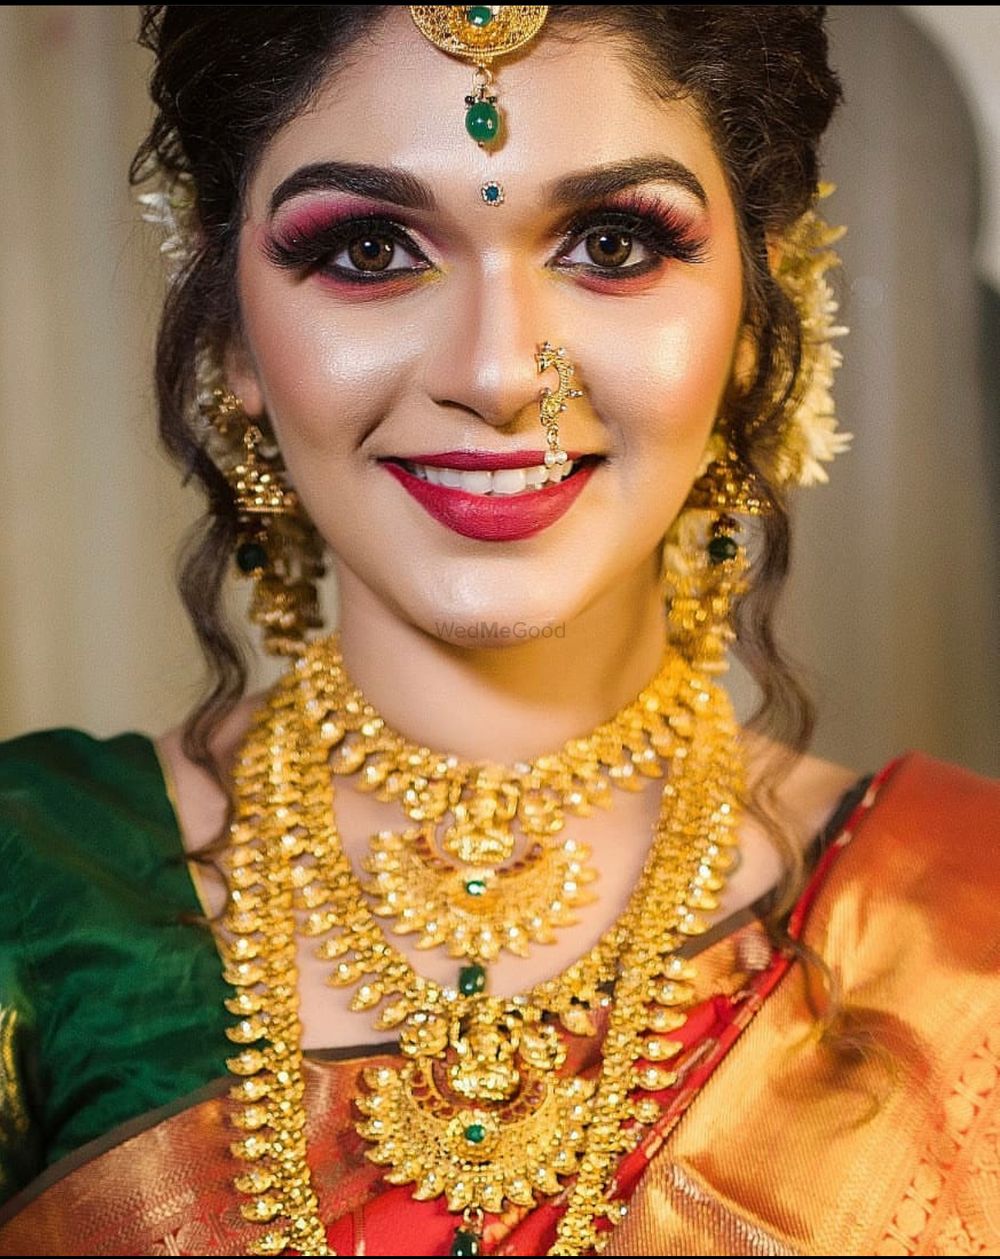 Photo From Shine of South Indian Brides - By Chetna Thakkar's Bridal Studio